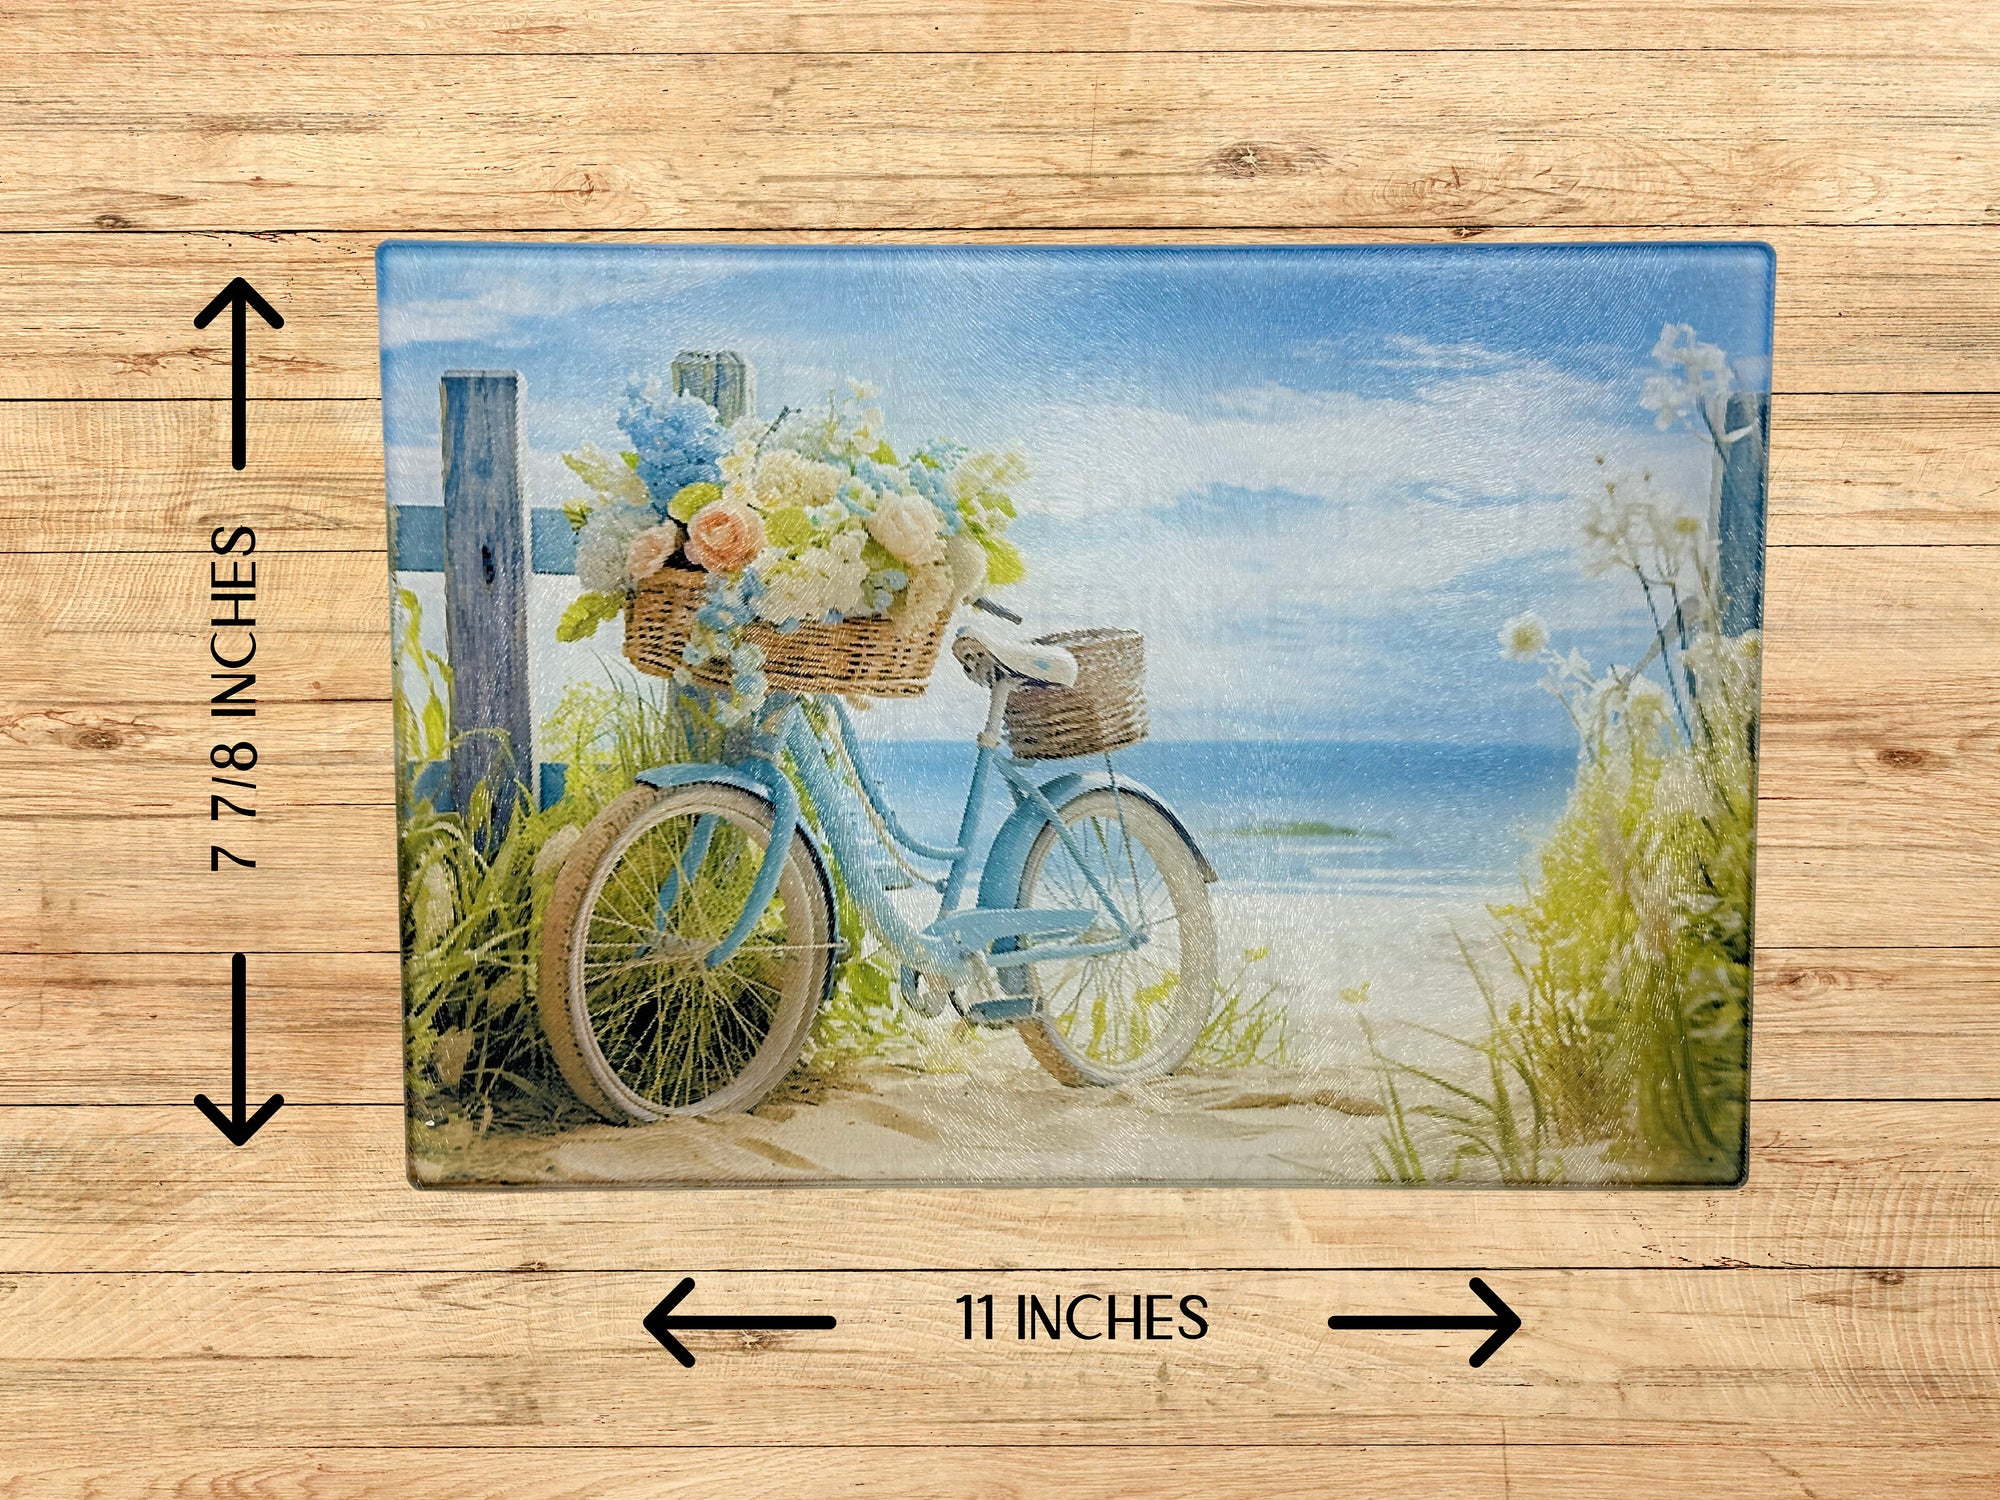 Personalized 8" x 11" Textured & Tempered Glass Cutting Board/Beach Scene Design/Space Saving Kitchen Accessory/#500